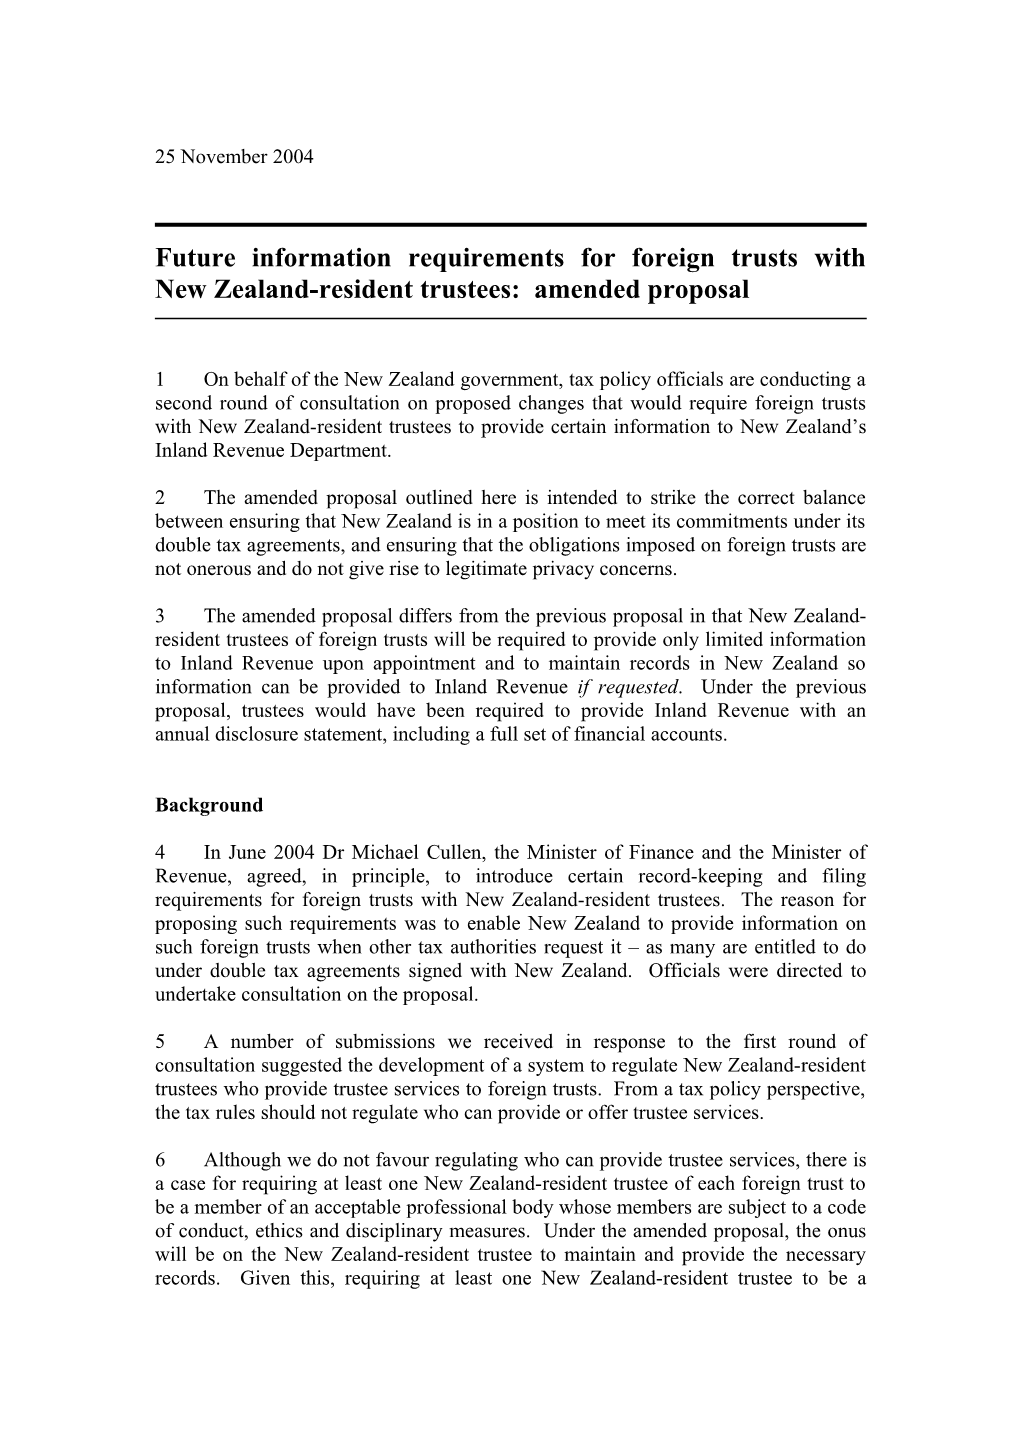 Foreign Trusts: Alternative Proposal for Consideration